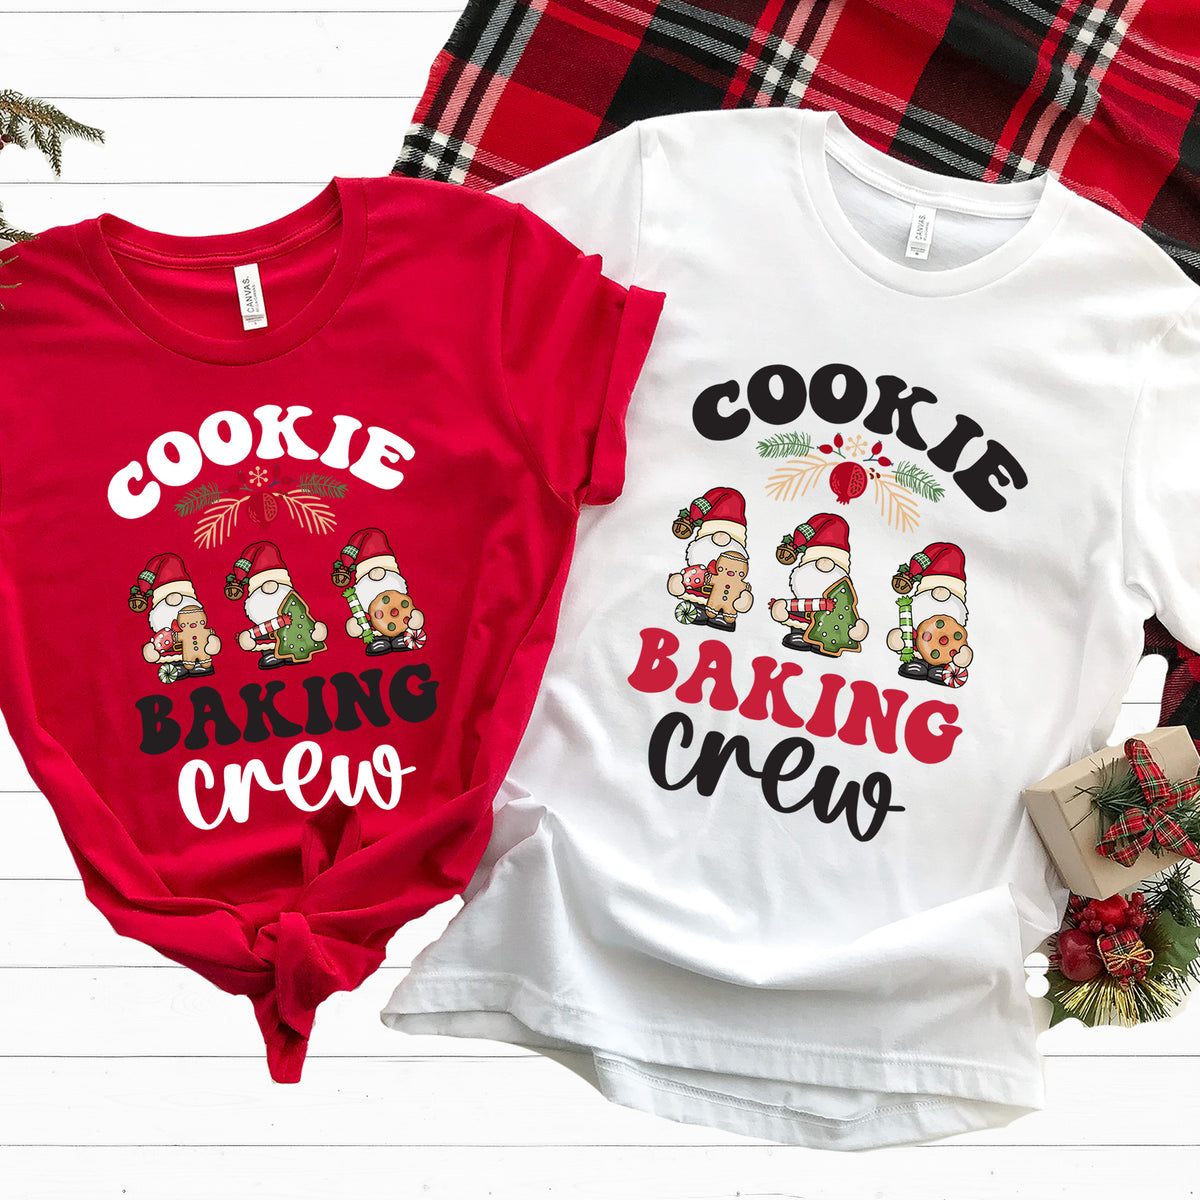 Cookie Baking Crew | Christmas Cookie Shirt | Baking Gift  | Red and White Unisex Jersey T-shirts